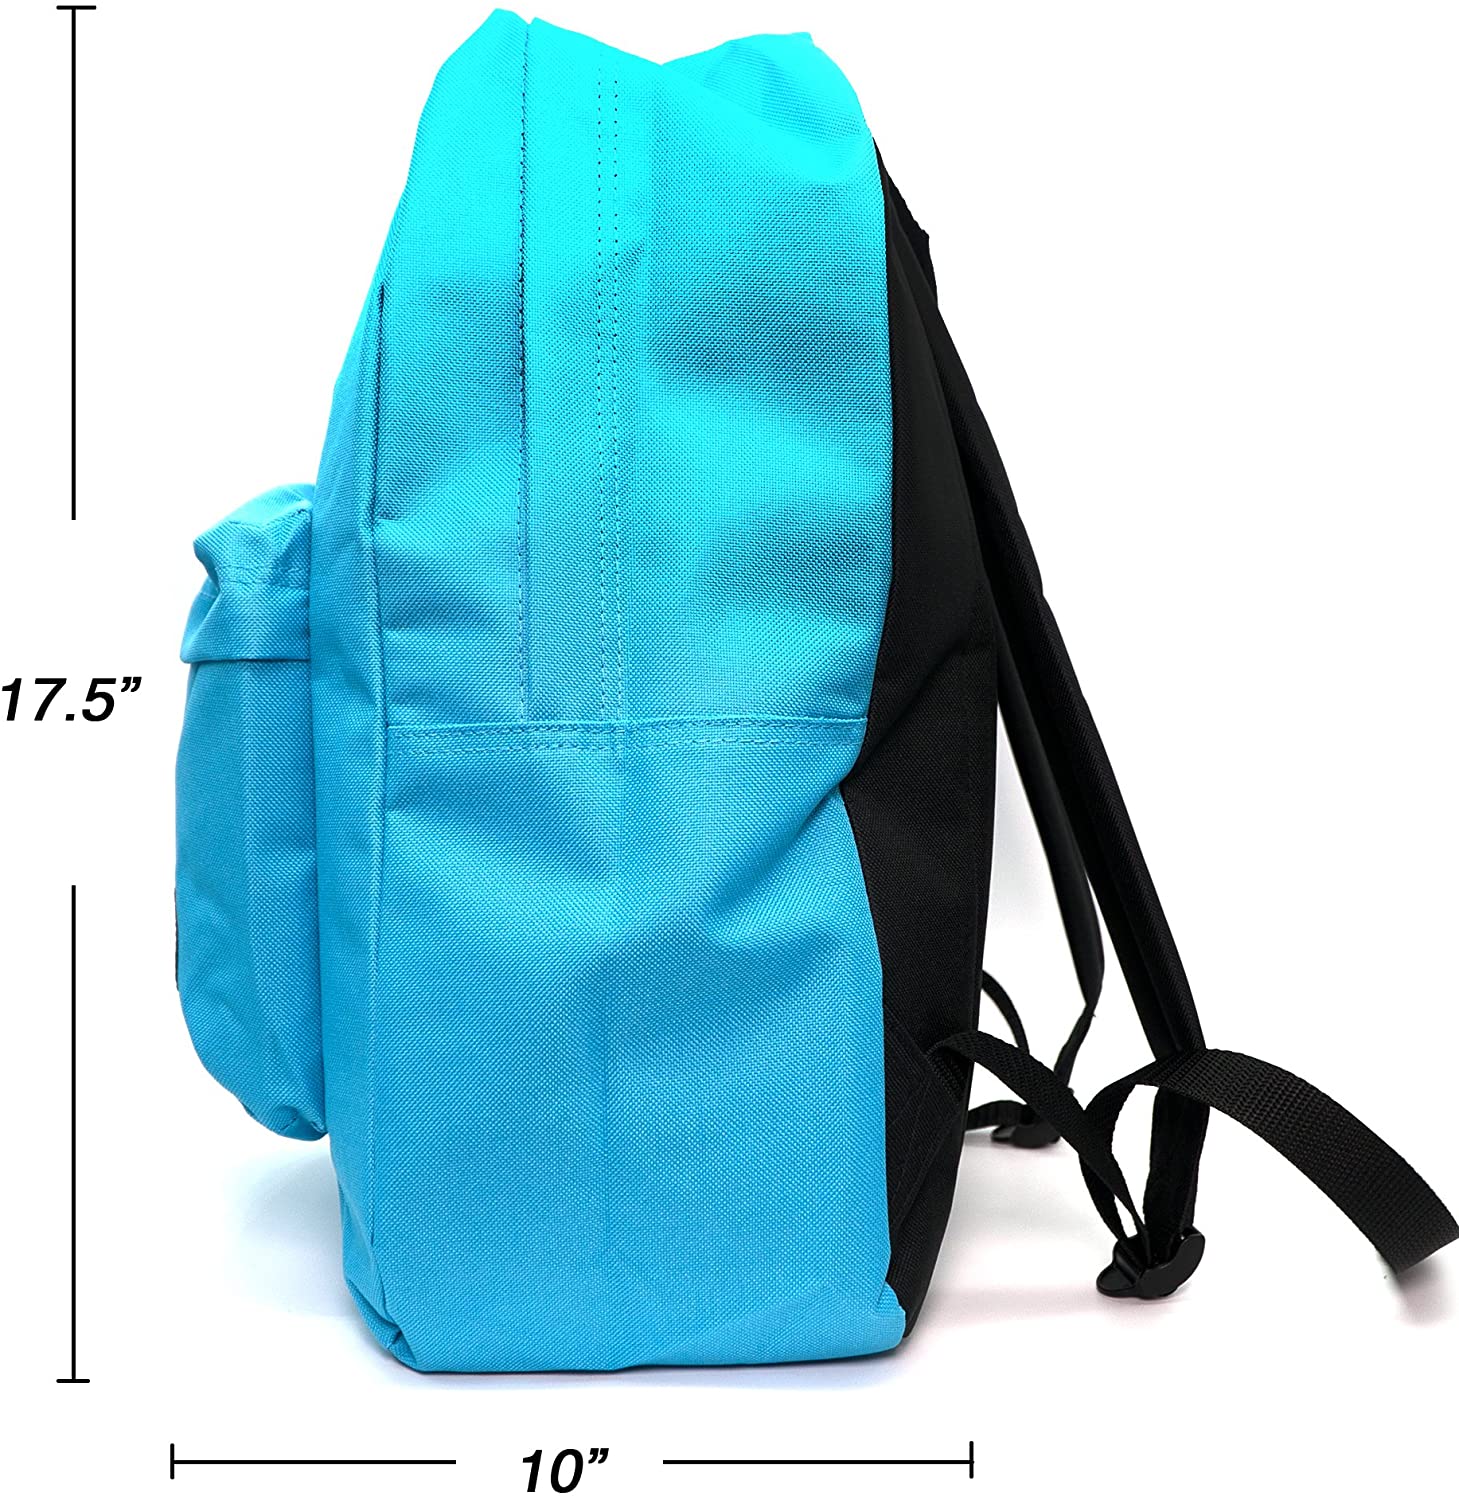 Emraw Multipurpose Schoolbag Travel Backpack For Girls Casual Security Backpack Women Rucksack with Trim Adjustable Straps Fashion Backpack Office , Cyan Classic - image 2 of 4